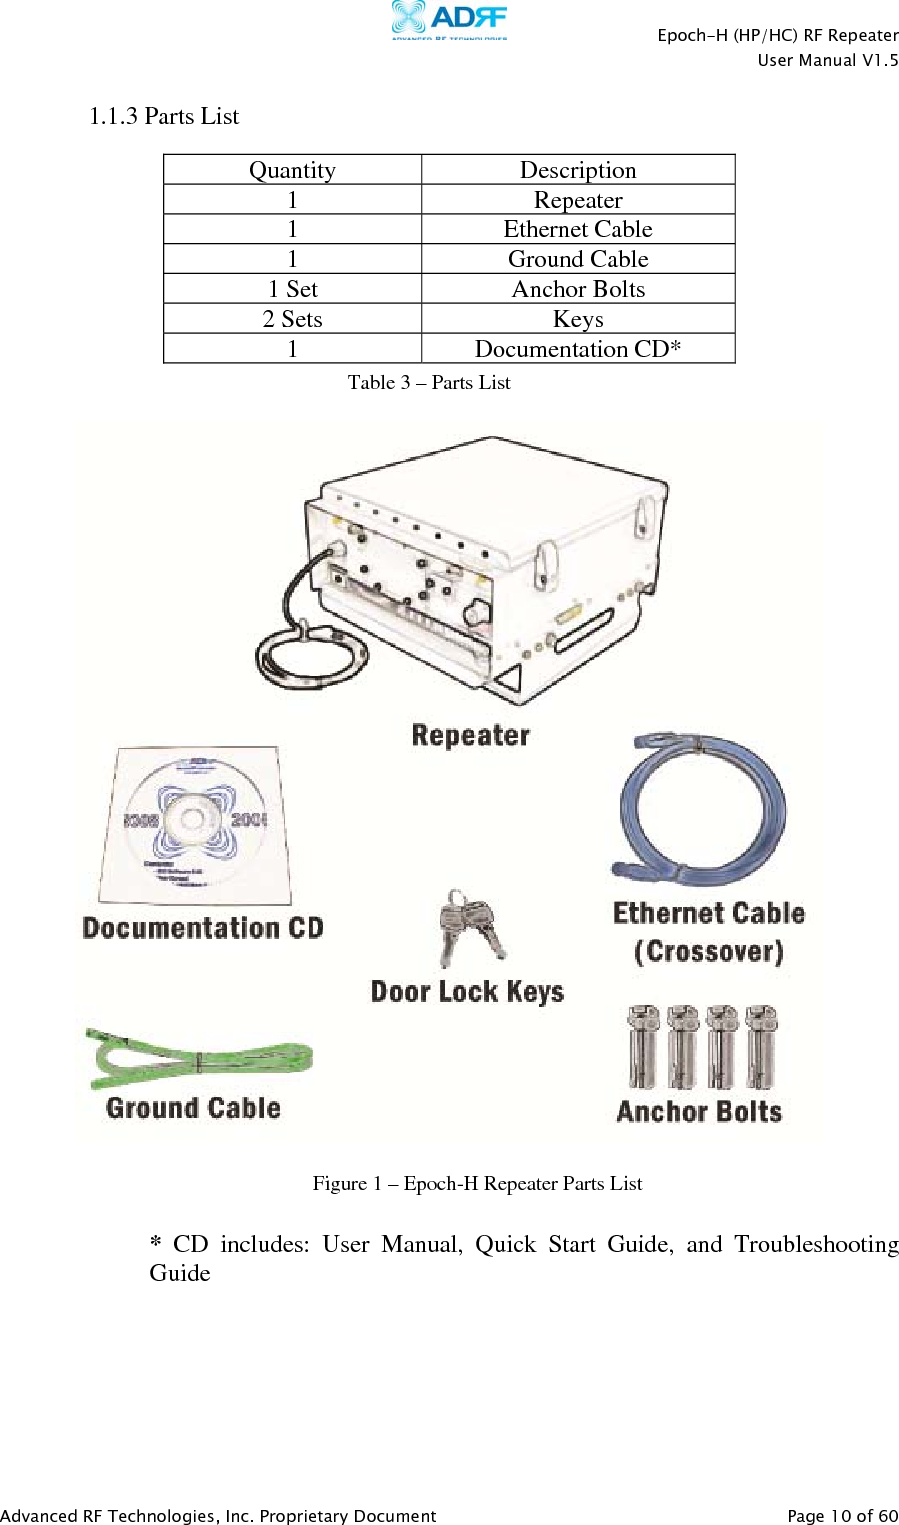    Epoch-H (HP/HC) RF Repeater  User Manual V1.5  Advanced RF Technologies, Inc. Proprietary Document   Page 10 of 60   1.1.3 Parts List    Quantity Description 1 Repeater 1 Ethernet Cable 1 Ground Cable 1 Set  Anchor Bolts 2 Sets  Keys 1 Documentation CD*       * CD includes: User Manual, Quick Start Guide, and Troubleshooting Guide Figure 1 – Epoch-H Repeater Parts List Table 3 – Parts List 